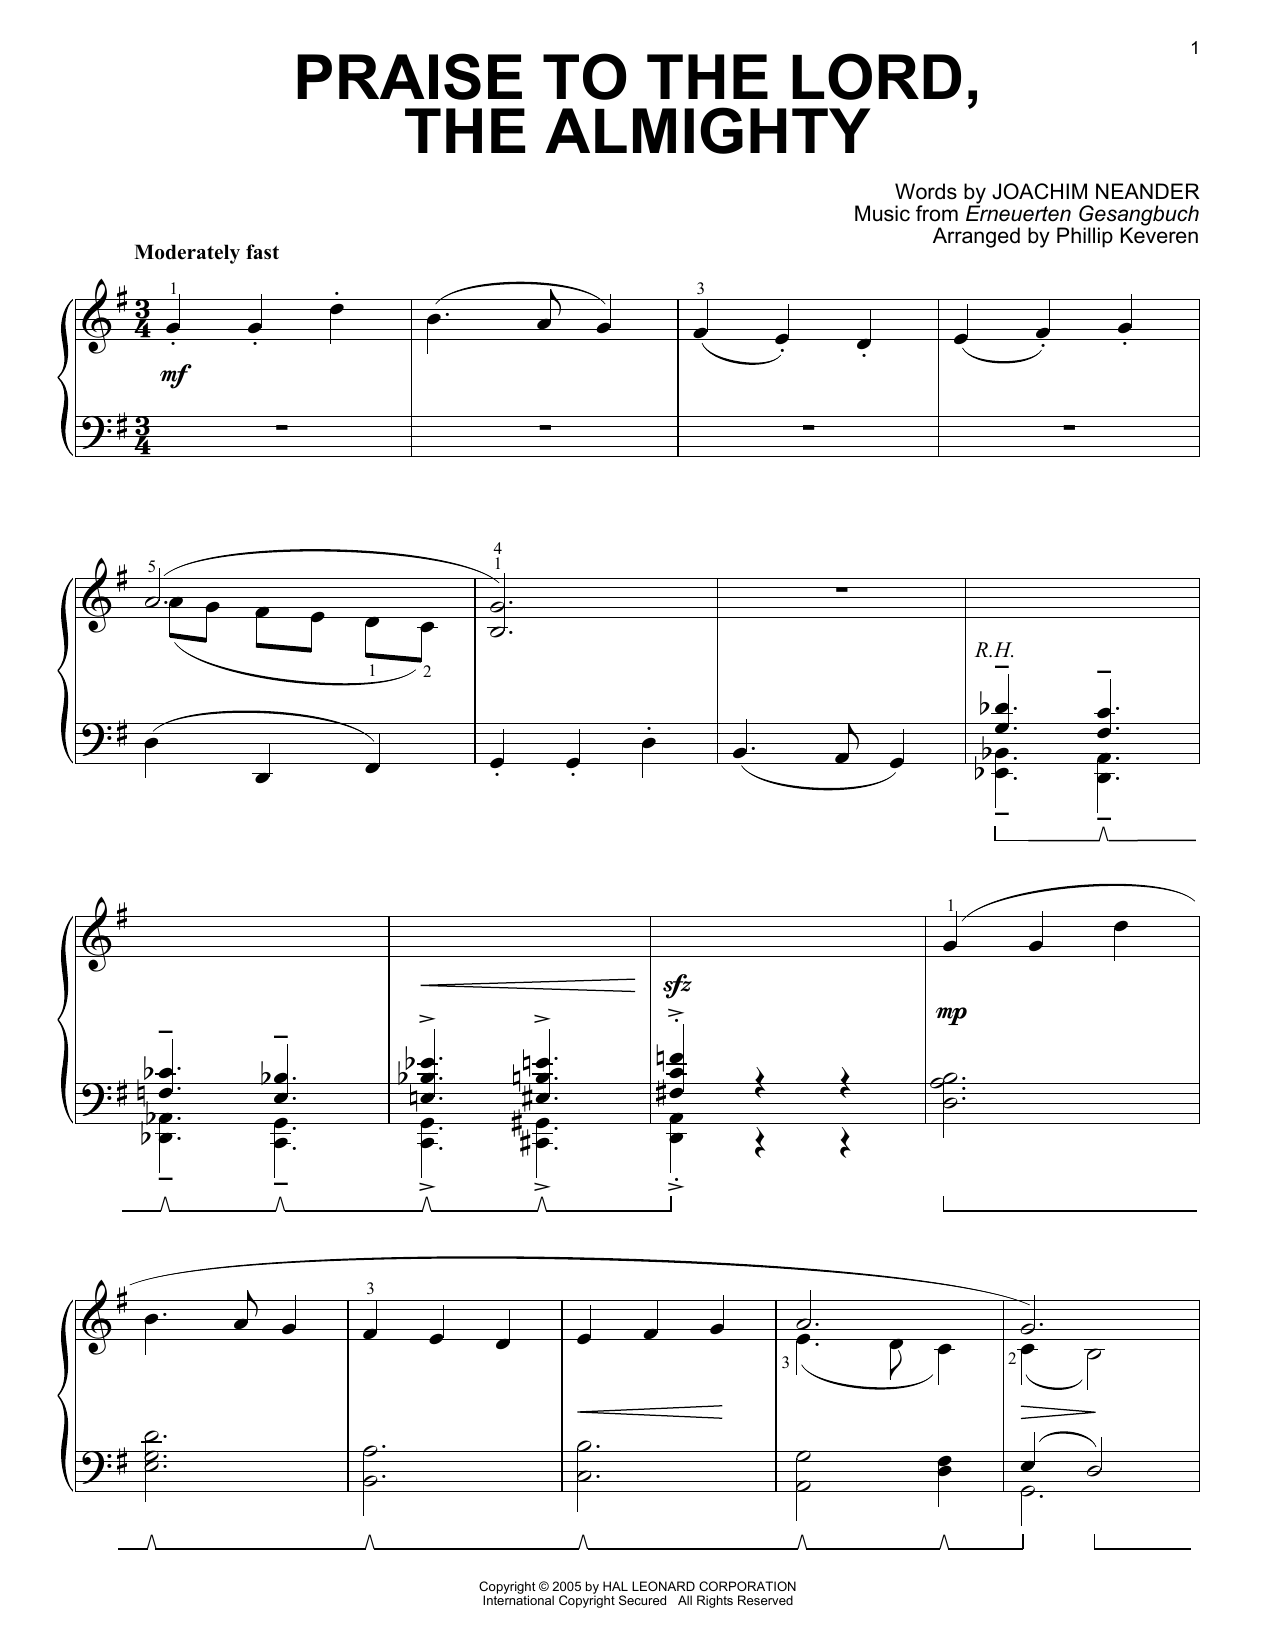 Download Joachim Neander Praise To The Lord, The Almighty [Jazz Sheet Music